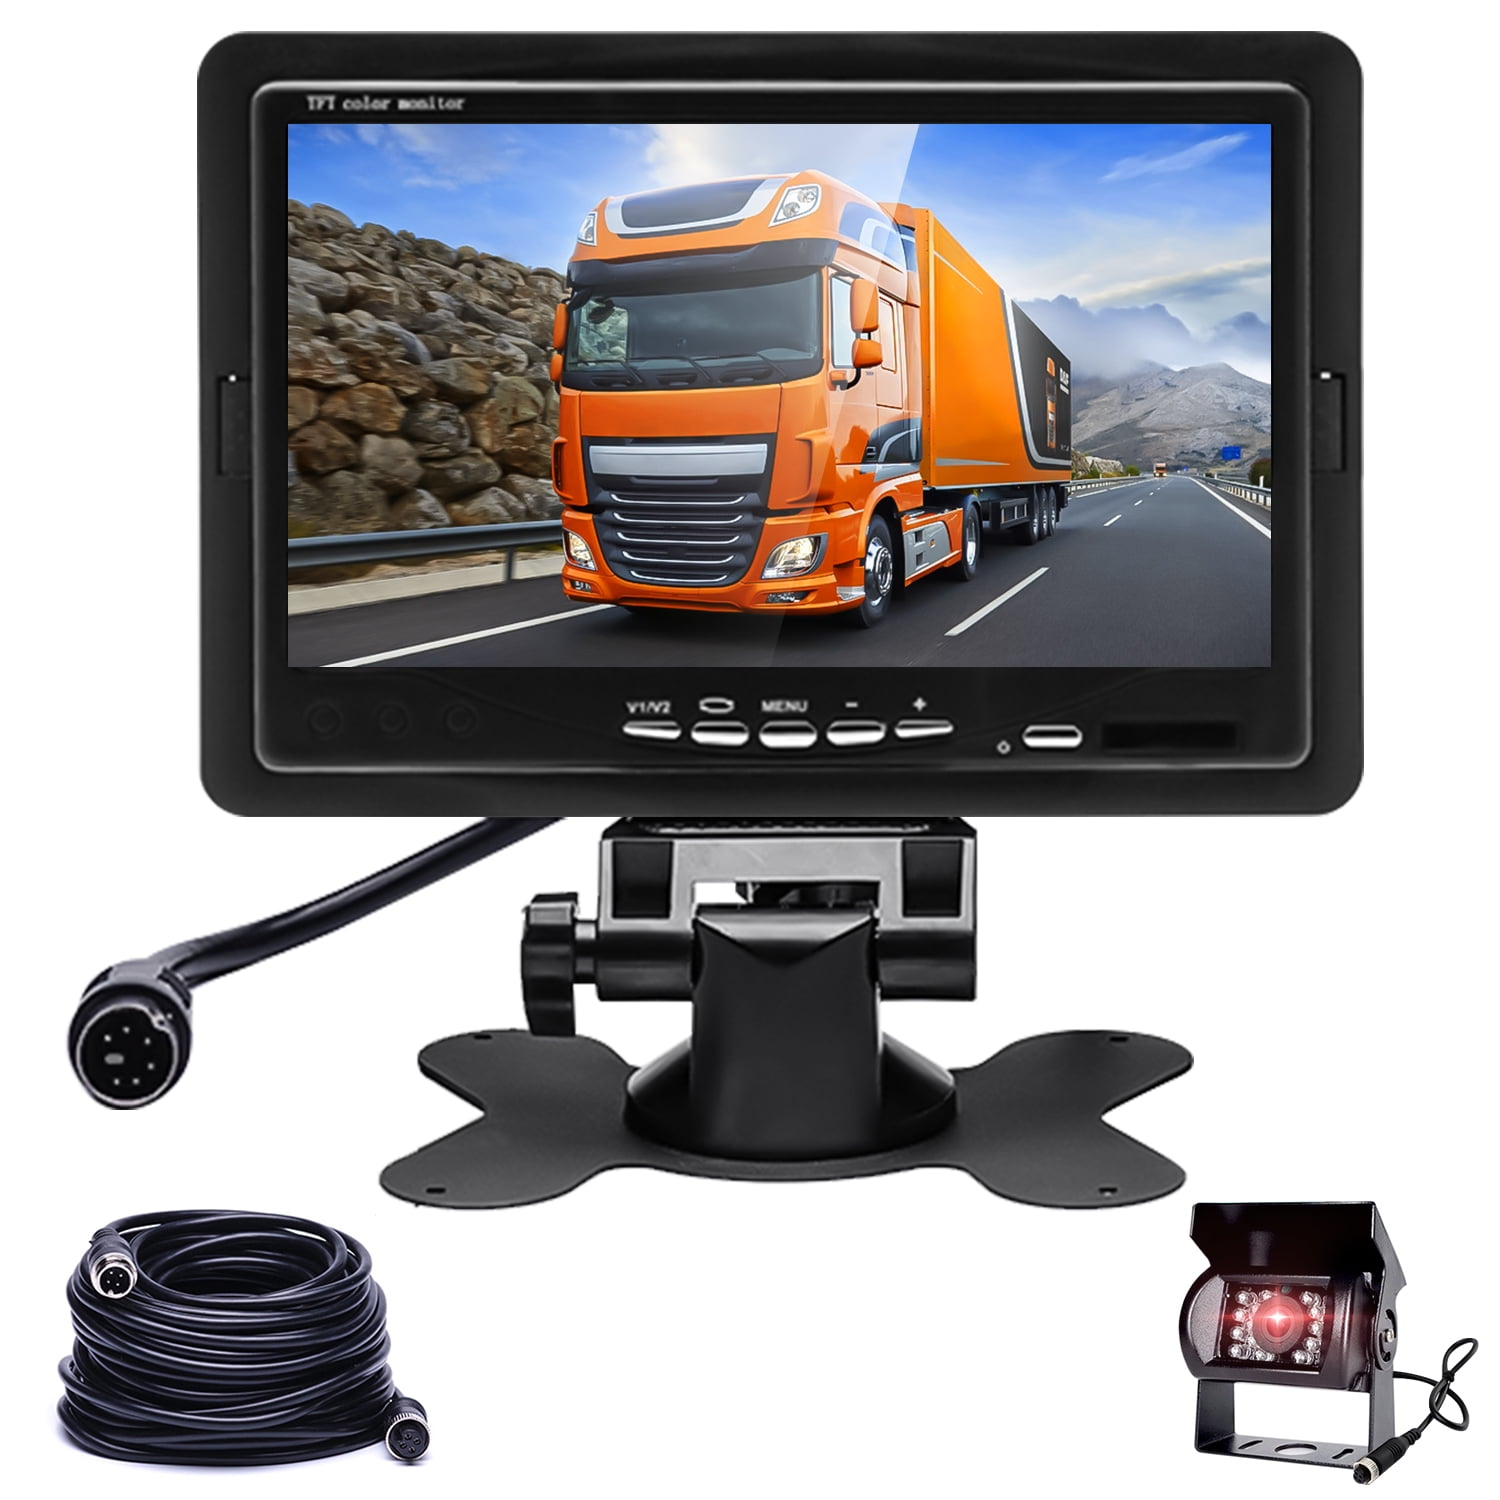 HD 18LEDs IR Night Vision Waterproof Reversing Reverse Rear View Camerafor Bus Truck Trailer 12V-24V Wireless Vehicle Backup Camera System 7 Wireless TFT LCD Color HD Monitor